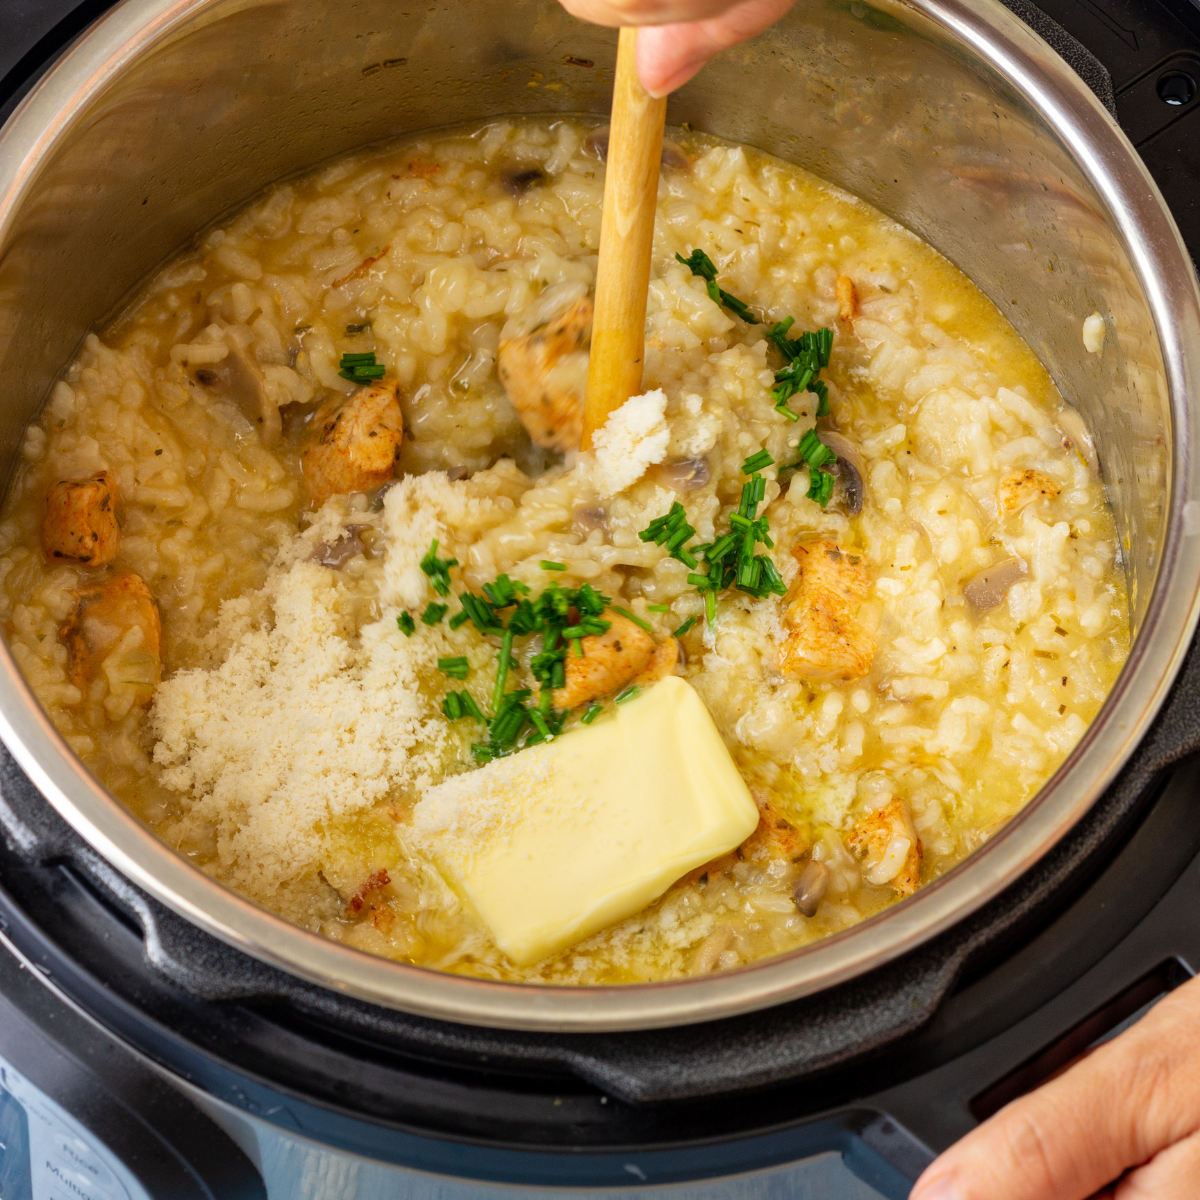 Rice dish in an instant pot, with liquid being poured inside.